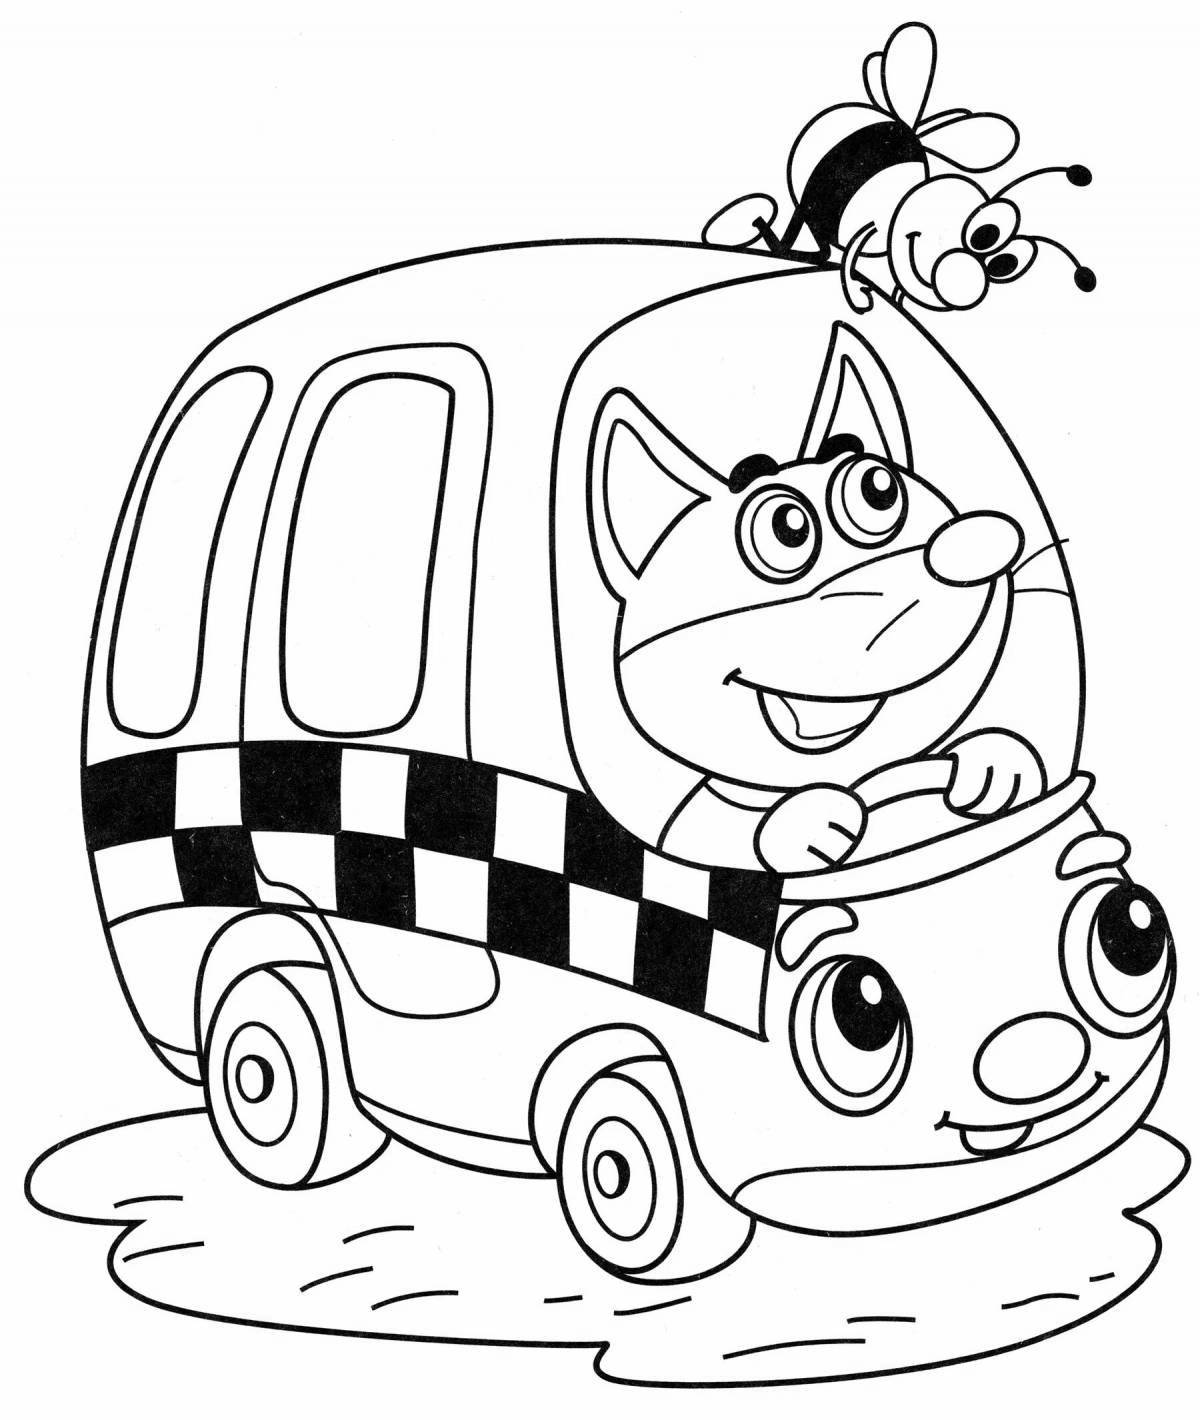 Gorgeous taxi coloring book for 3-4 year olds